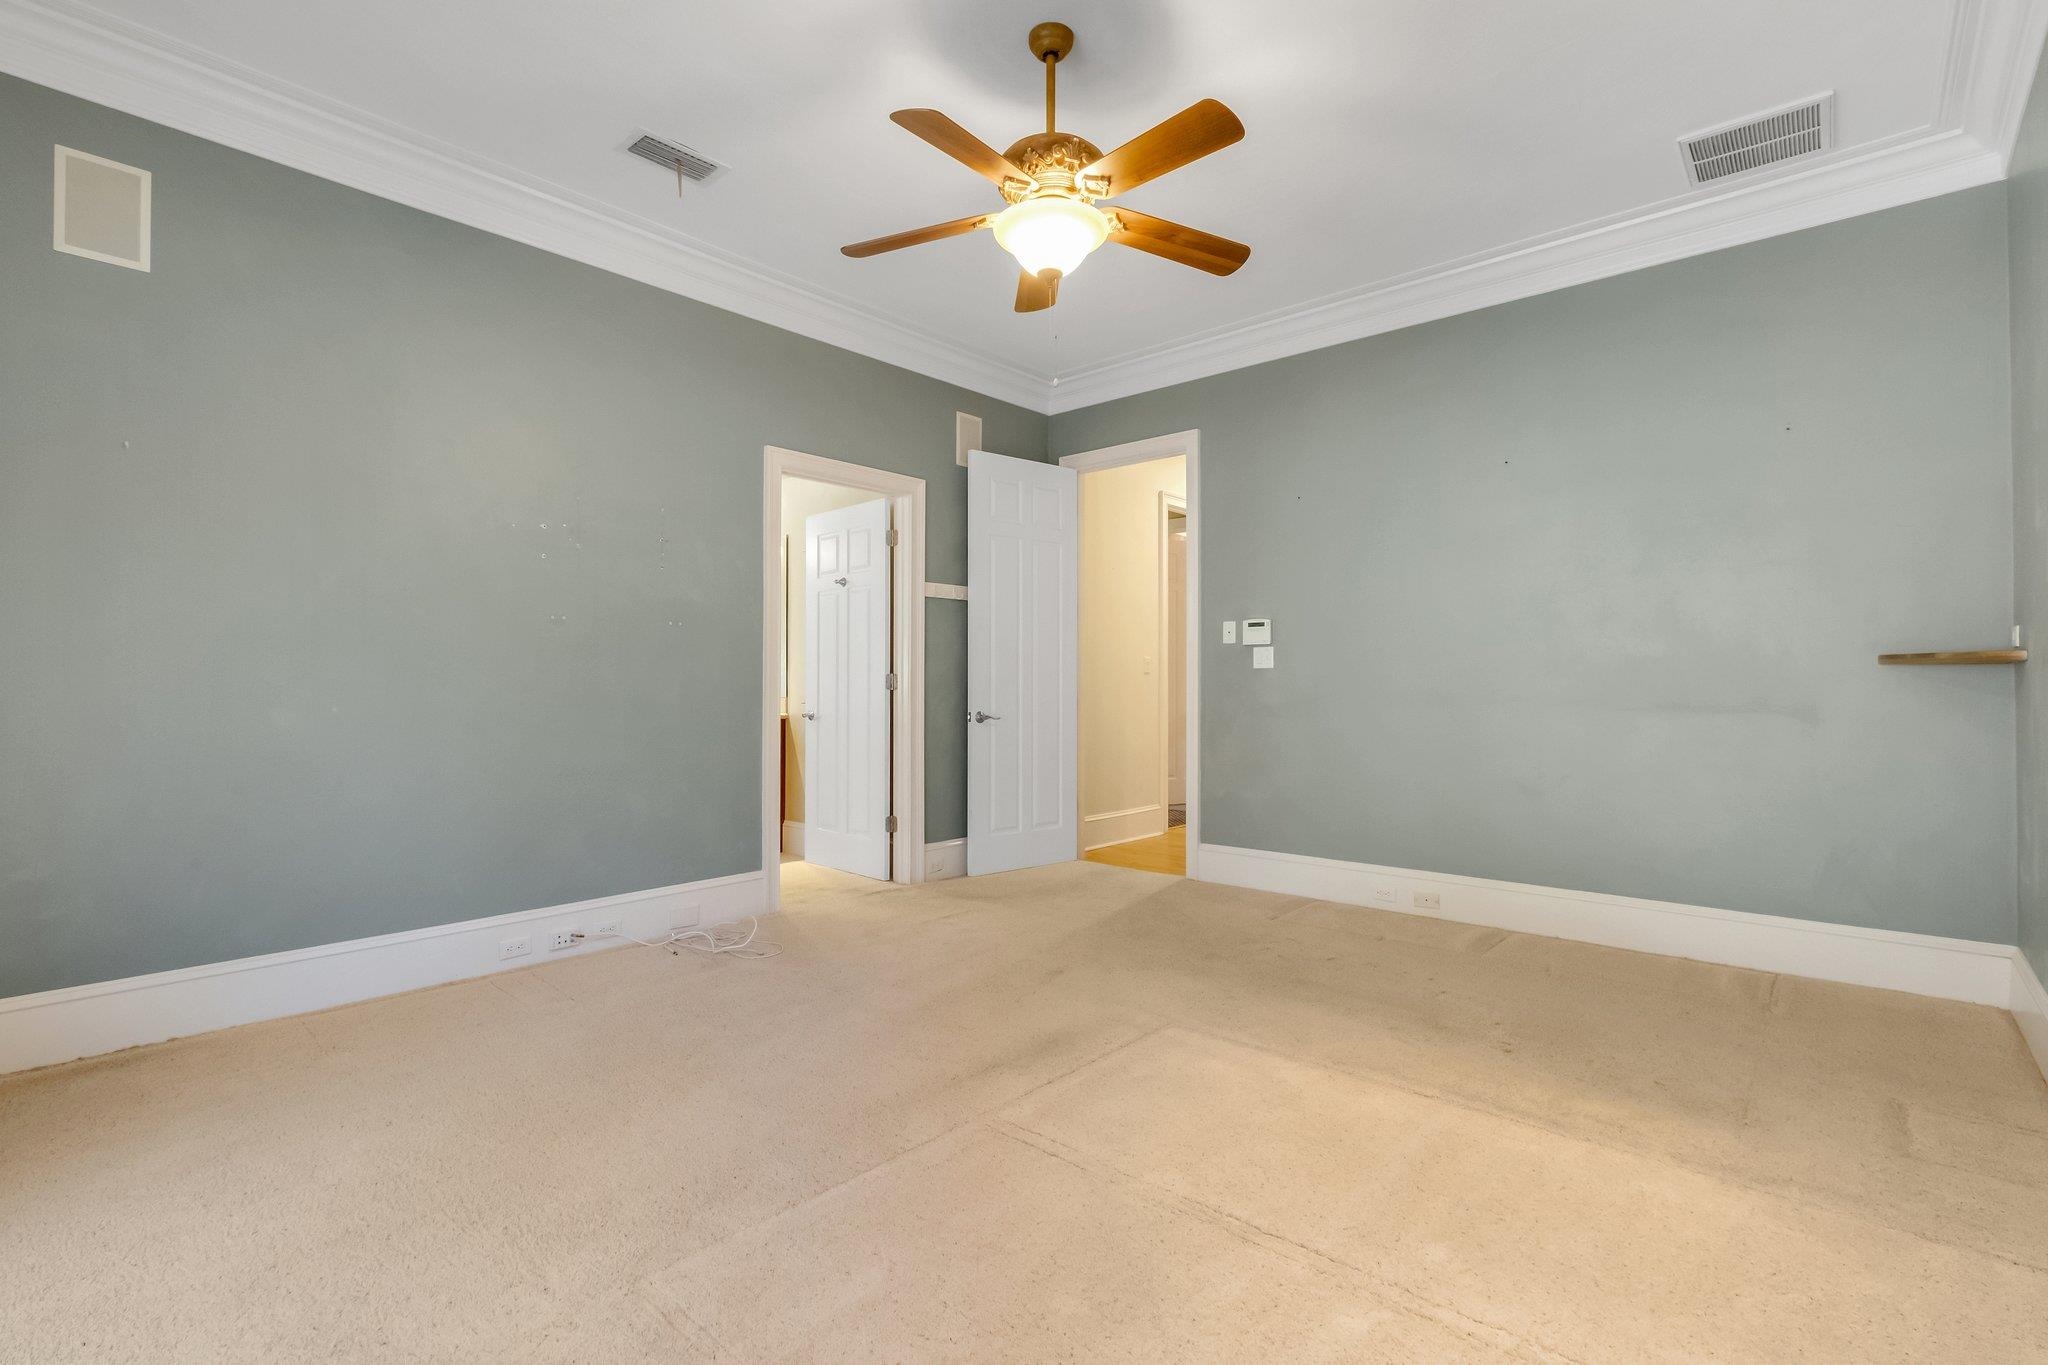 1504 China Grove Trail,TALLAHASSEE,Florida 32301,2 Bedrooms Bedrooms,2 BathroomsBathrooms,Detached single family,1504 China Grove Trail,368485